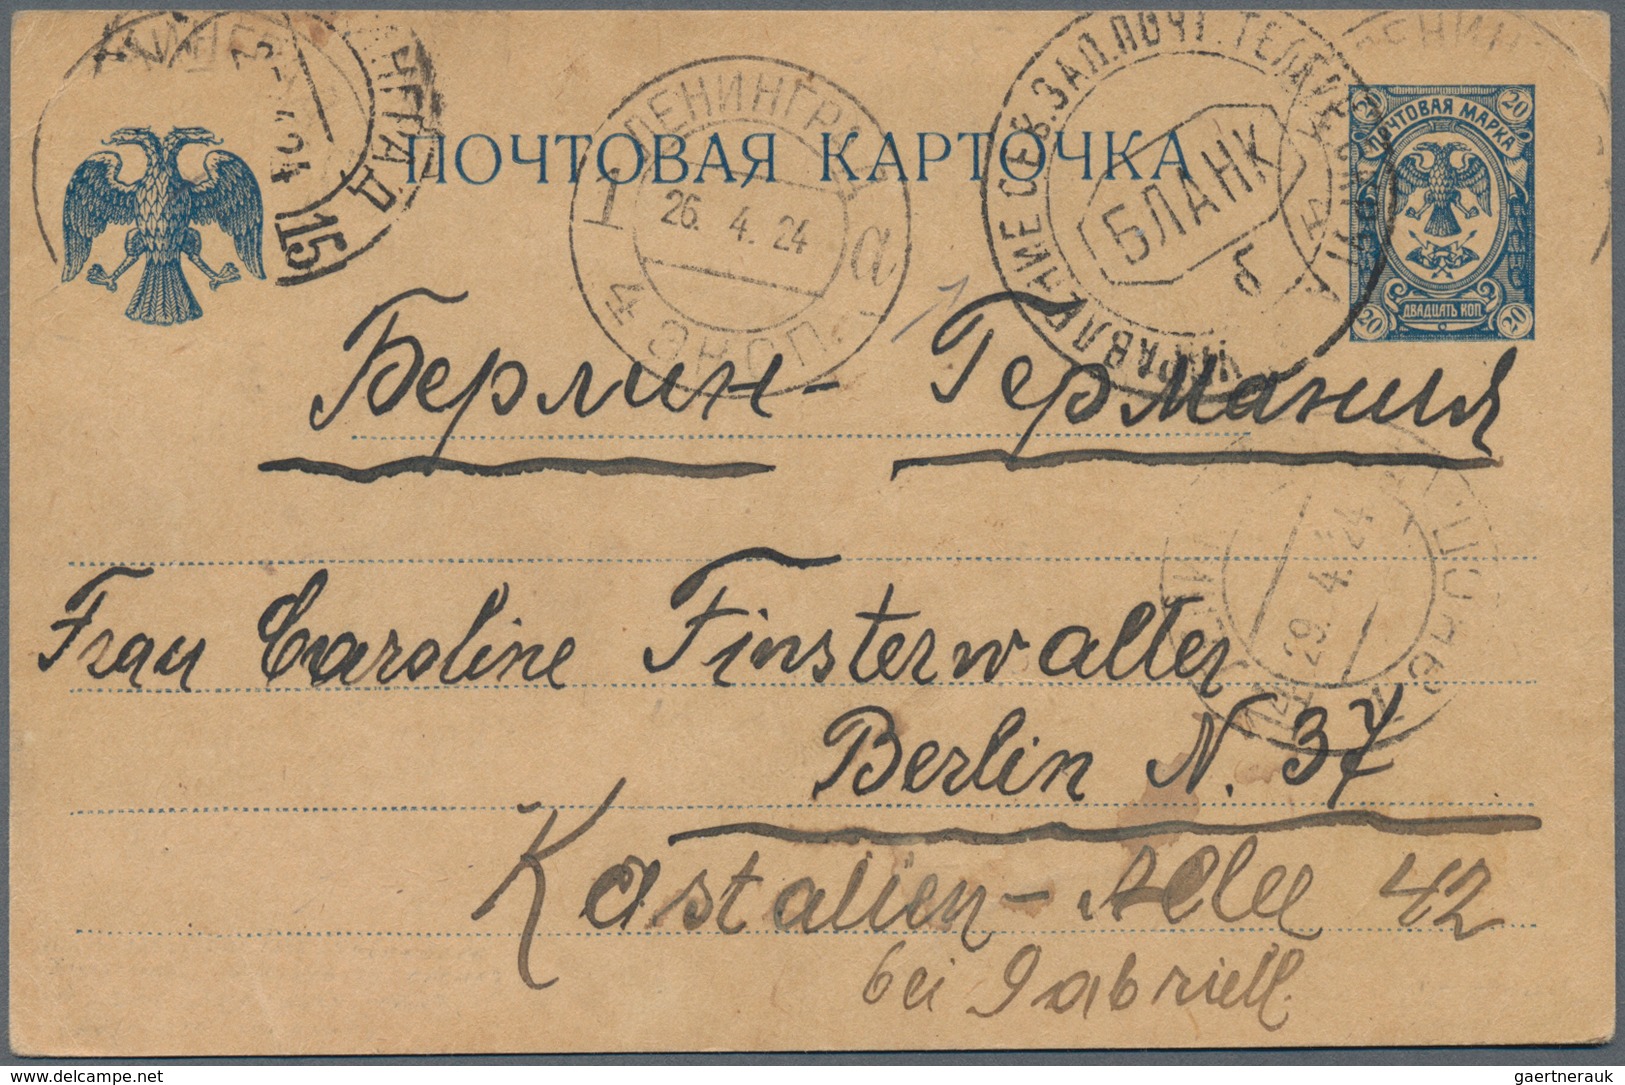 Russland - Ganzsachen: 1870/1940 (ca.), Imperial Russia/area/Soviet Union, sophisticated collection